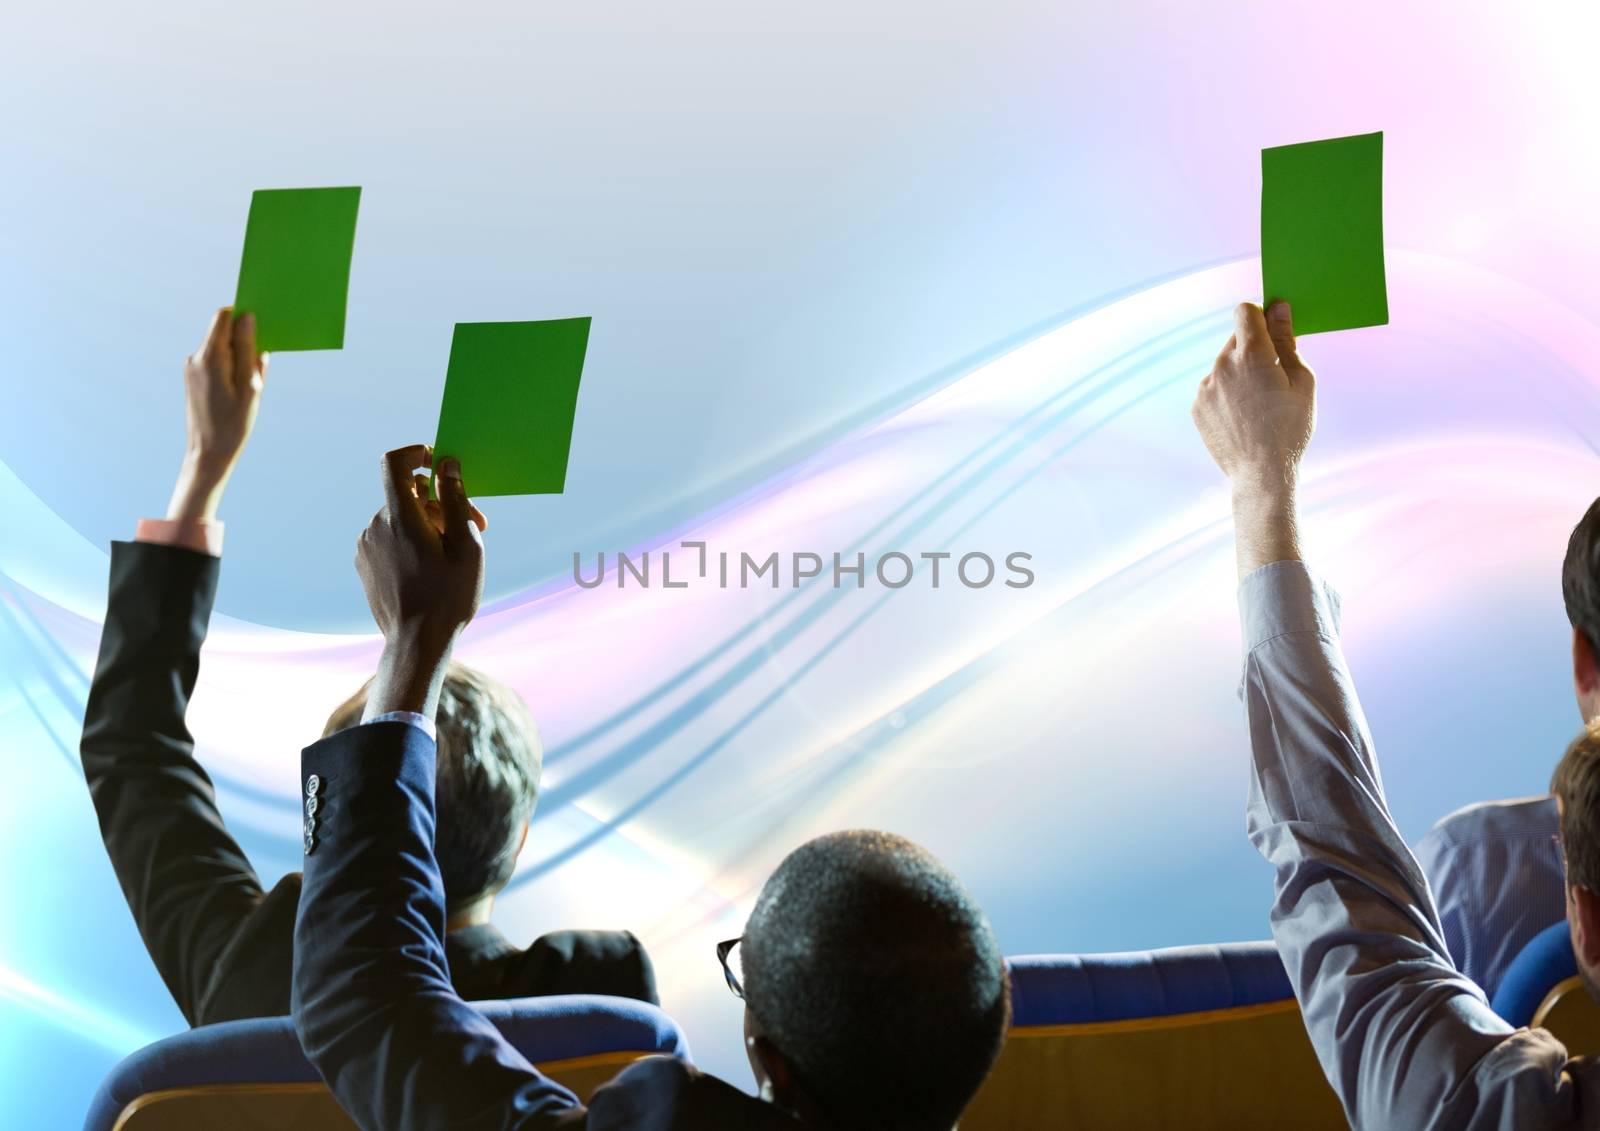 Digital composite of Business people holding green cards in seats